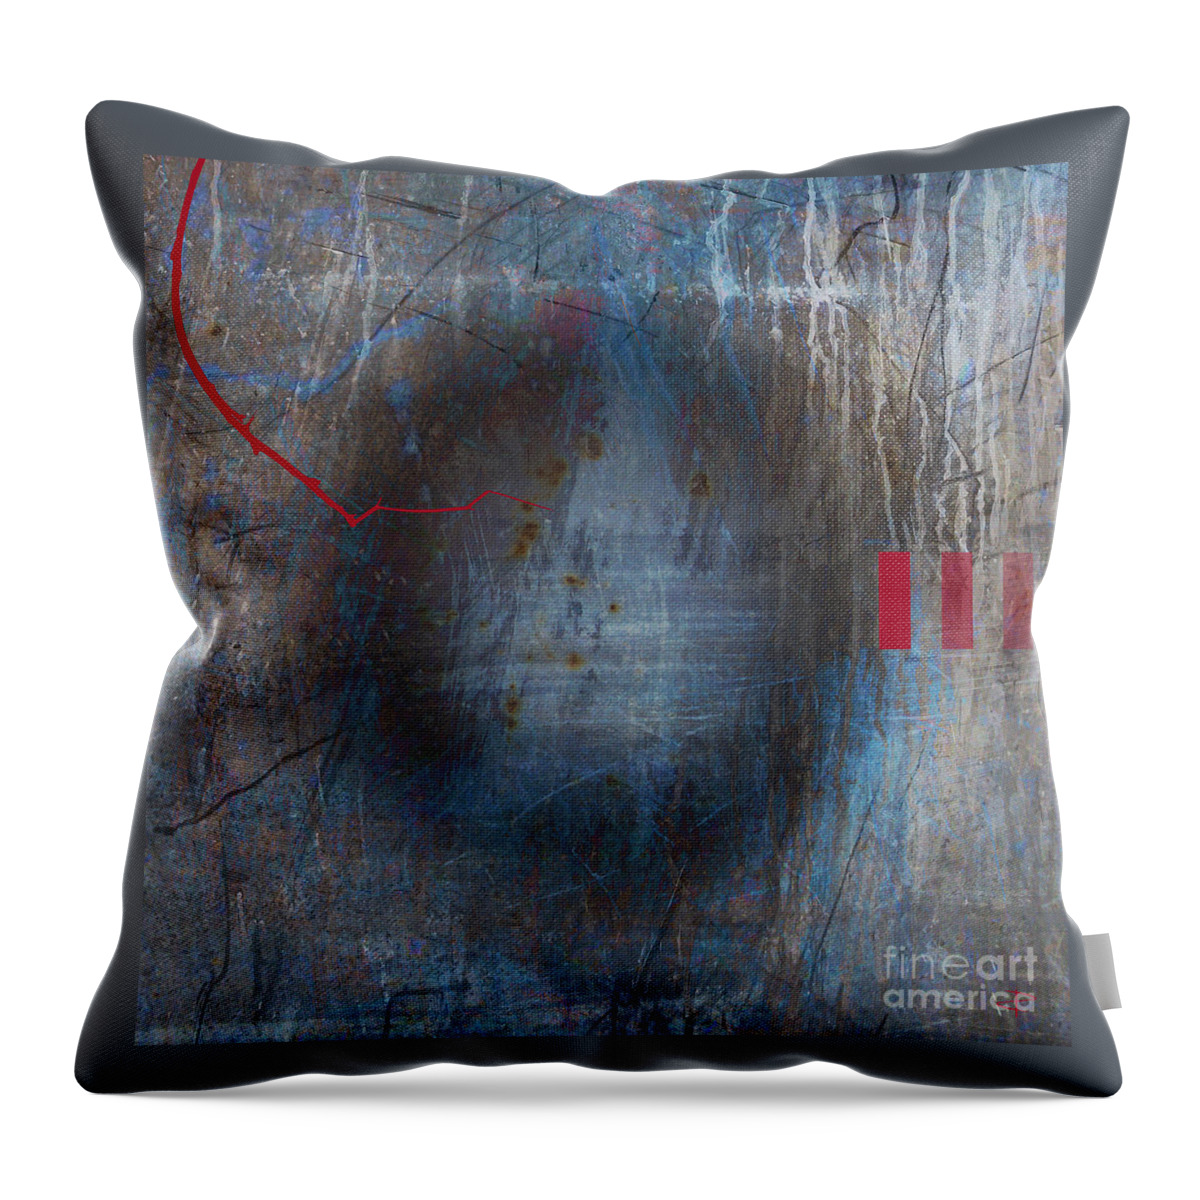 Abstract Throw Pillow featuring the painting Myopic Repercussion by Paul Davenport